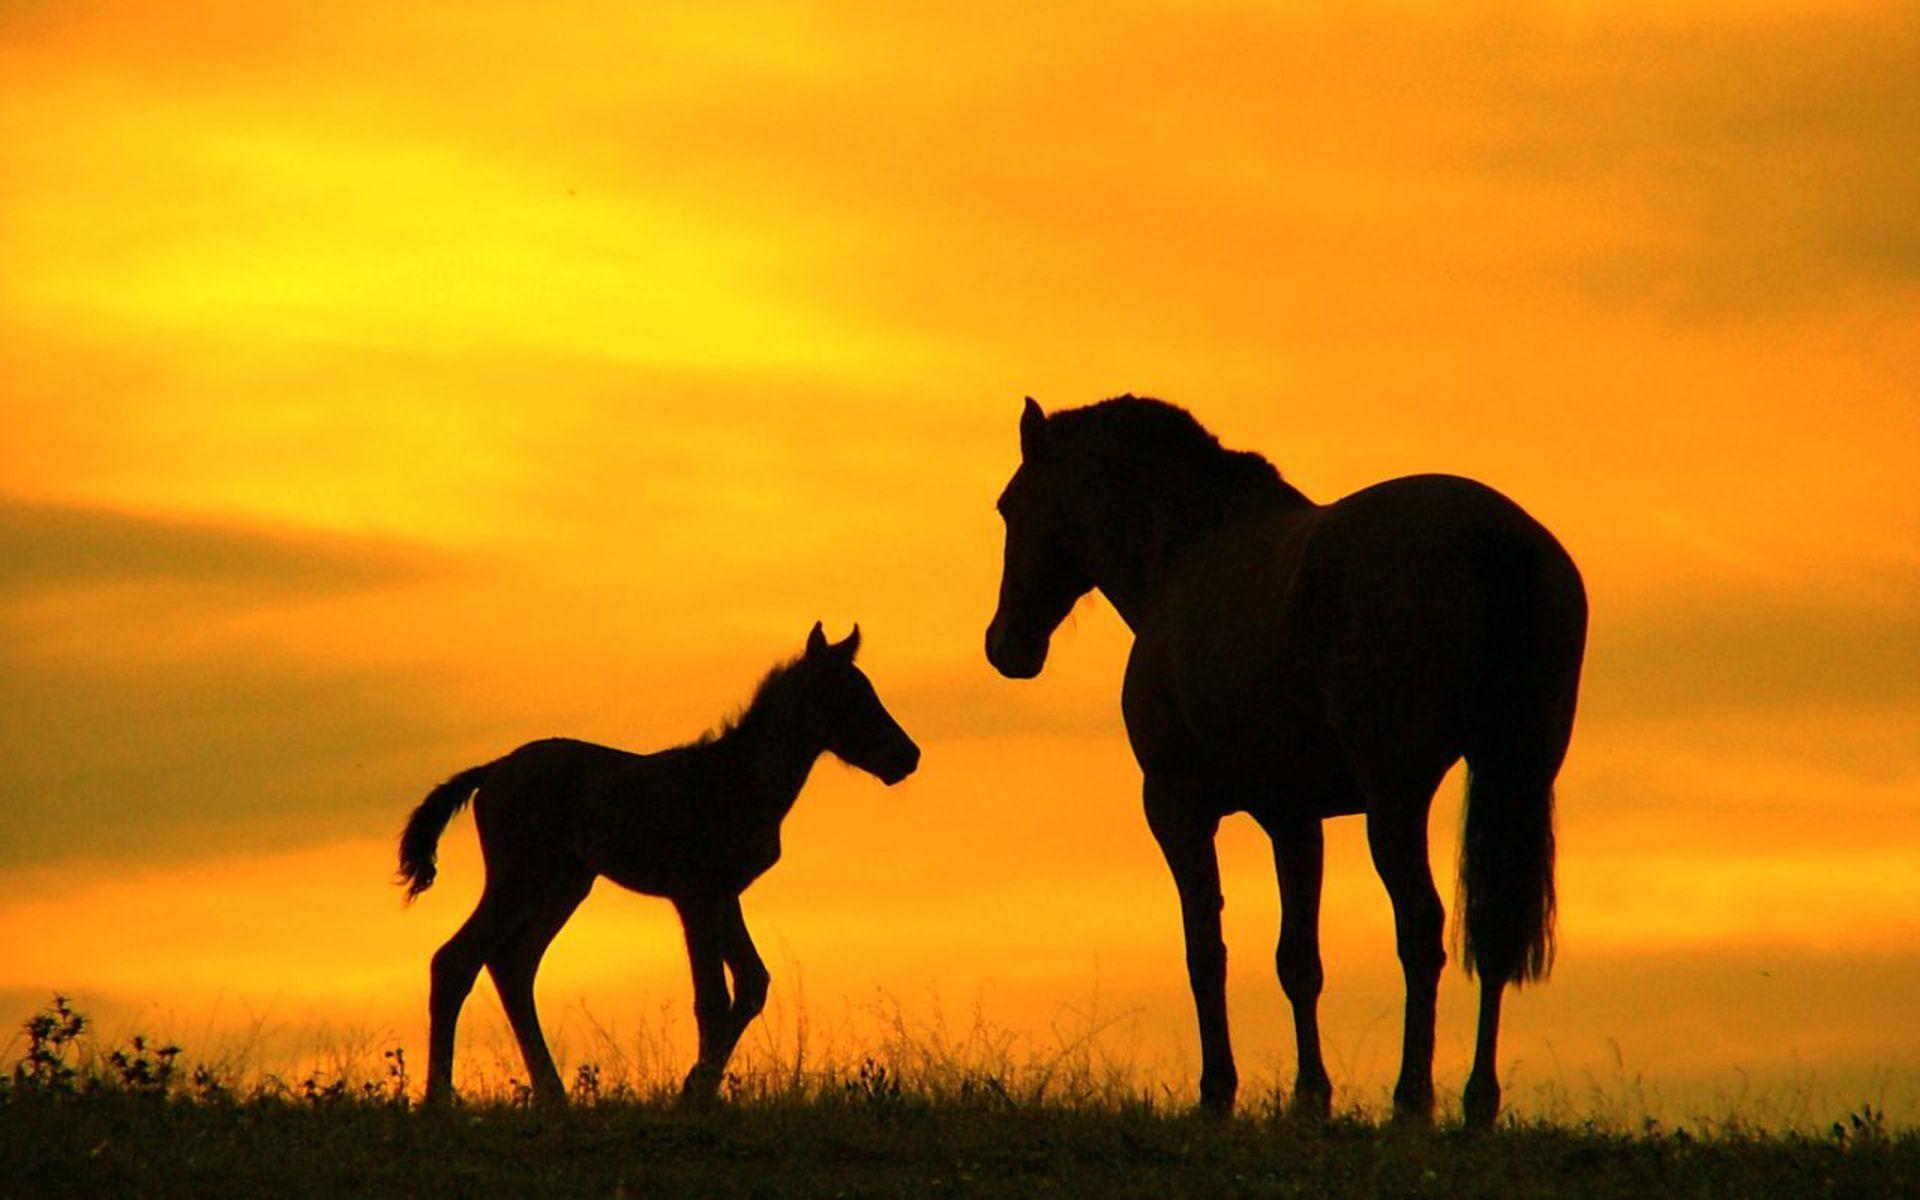 Horses picture family horse ranch free desktop background